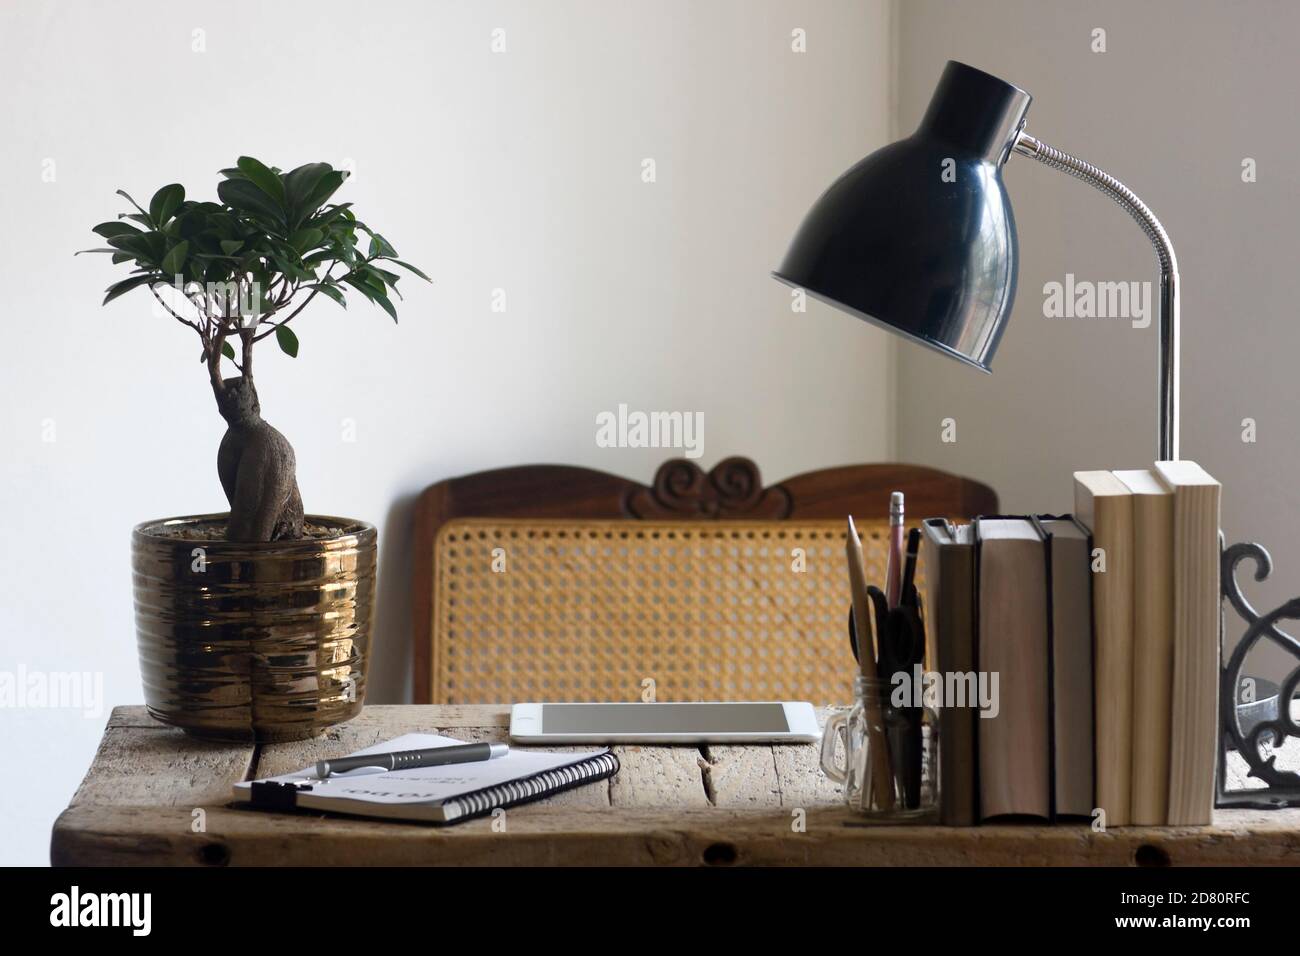 A home office work space that is organized and ready to be used for productive work from home. Stock Photo